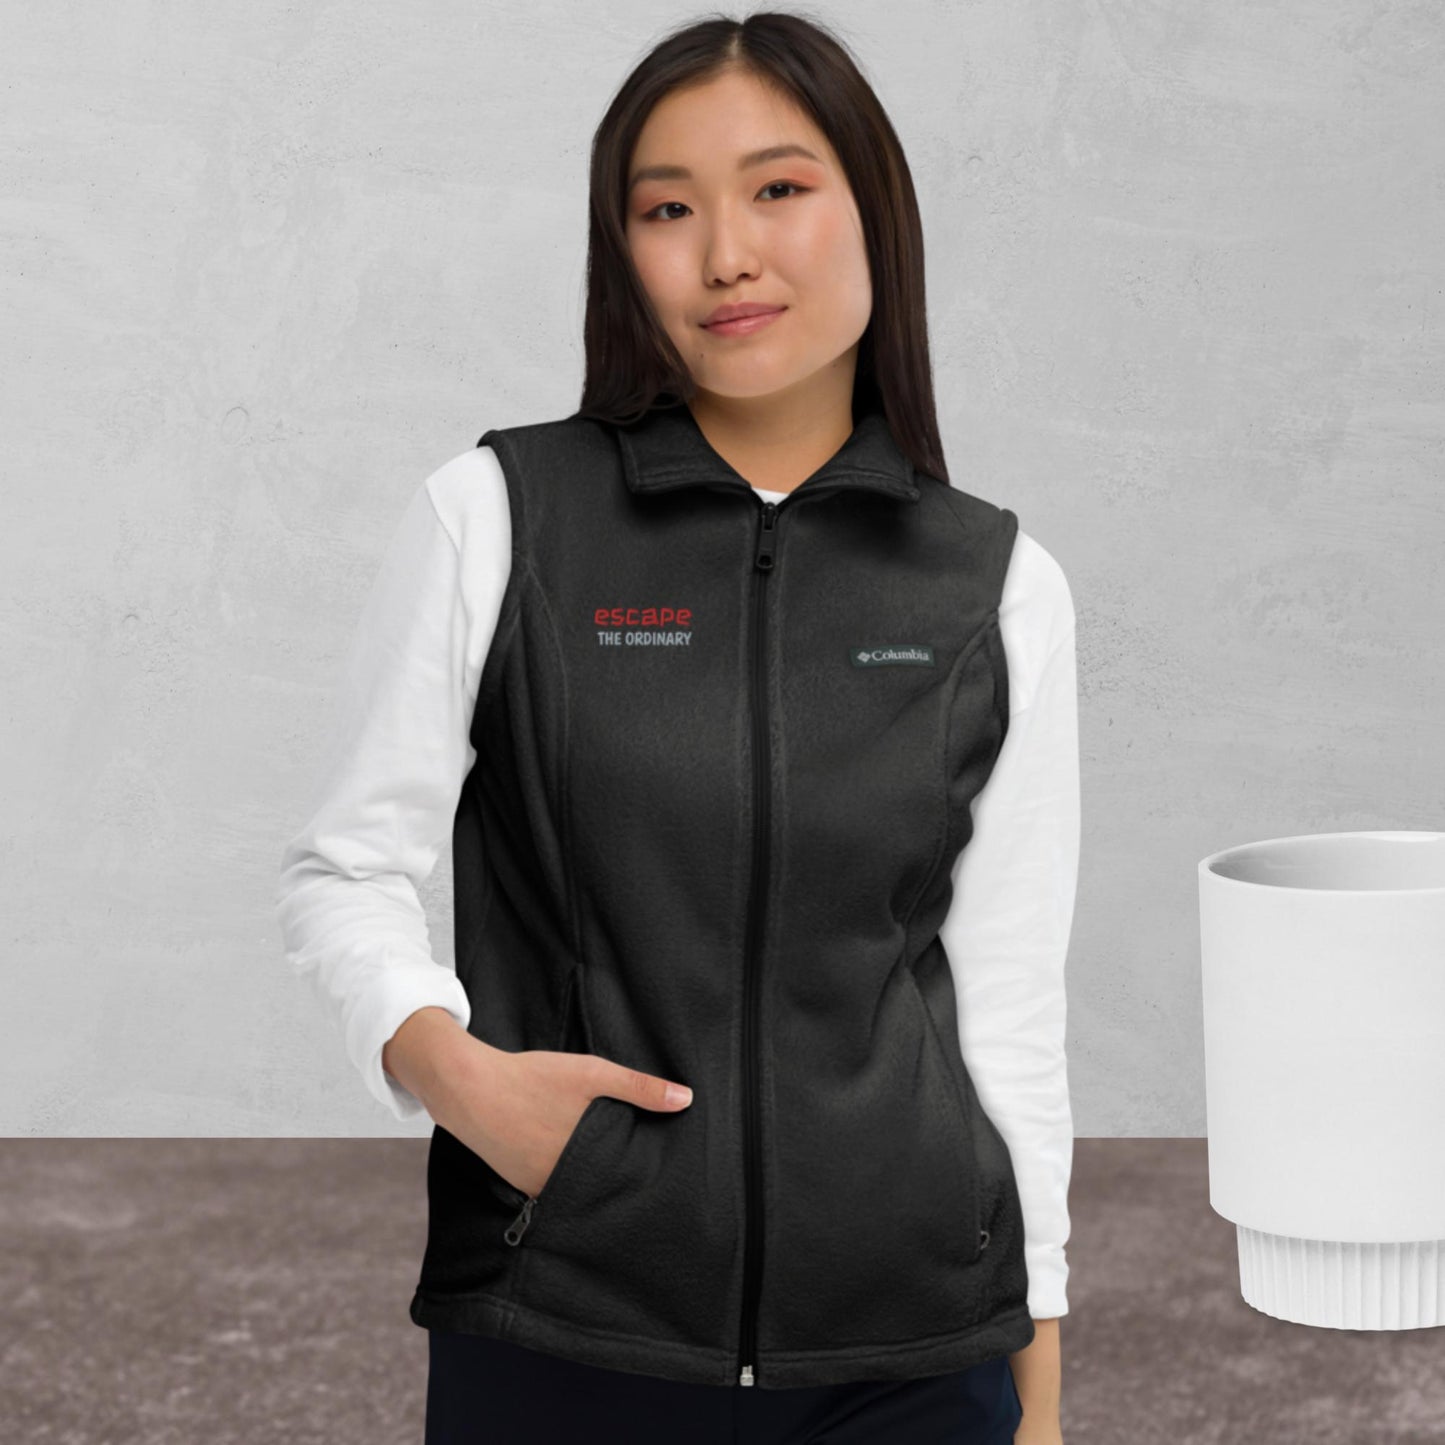 Women’s Columbia fleece vest, red/ grey color thread embroidery, "escape the ordinary", right chest.